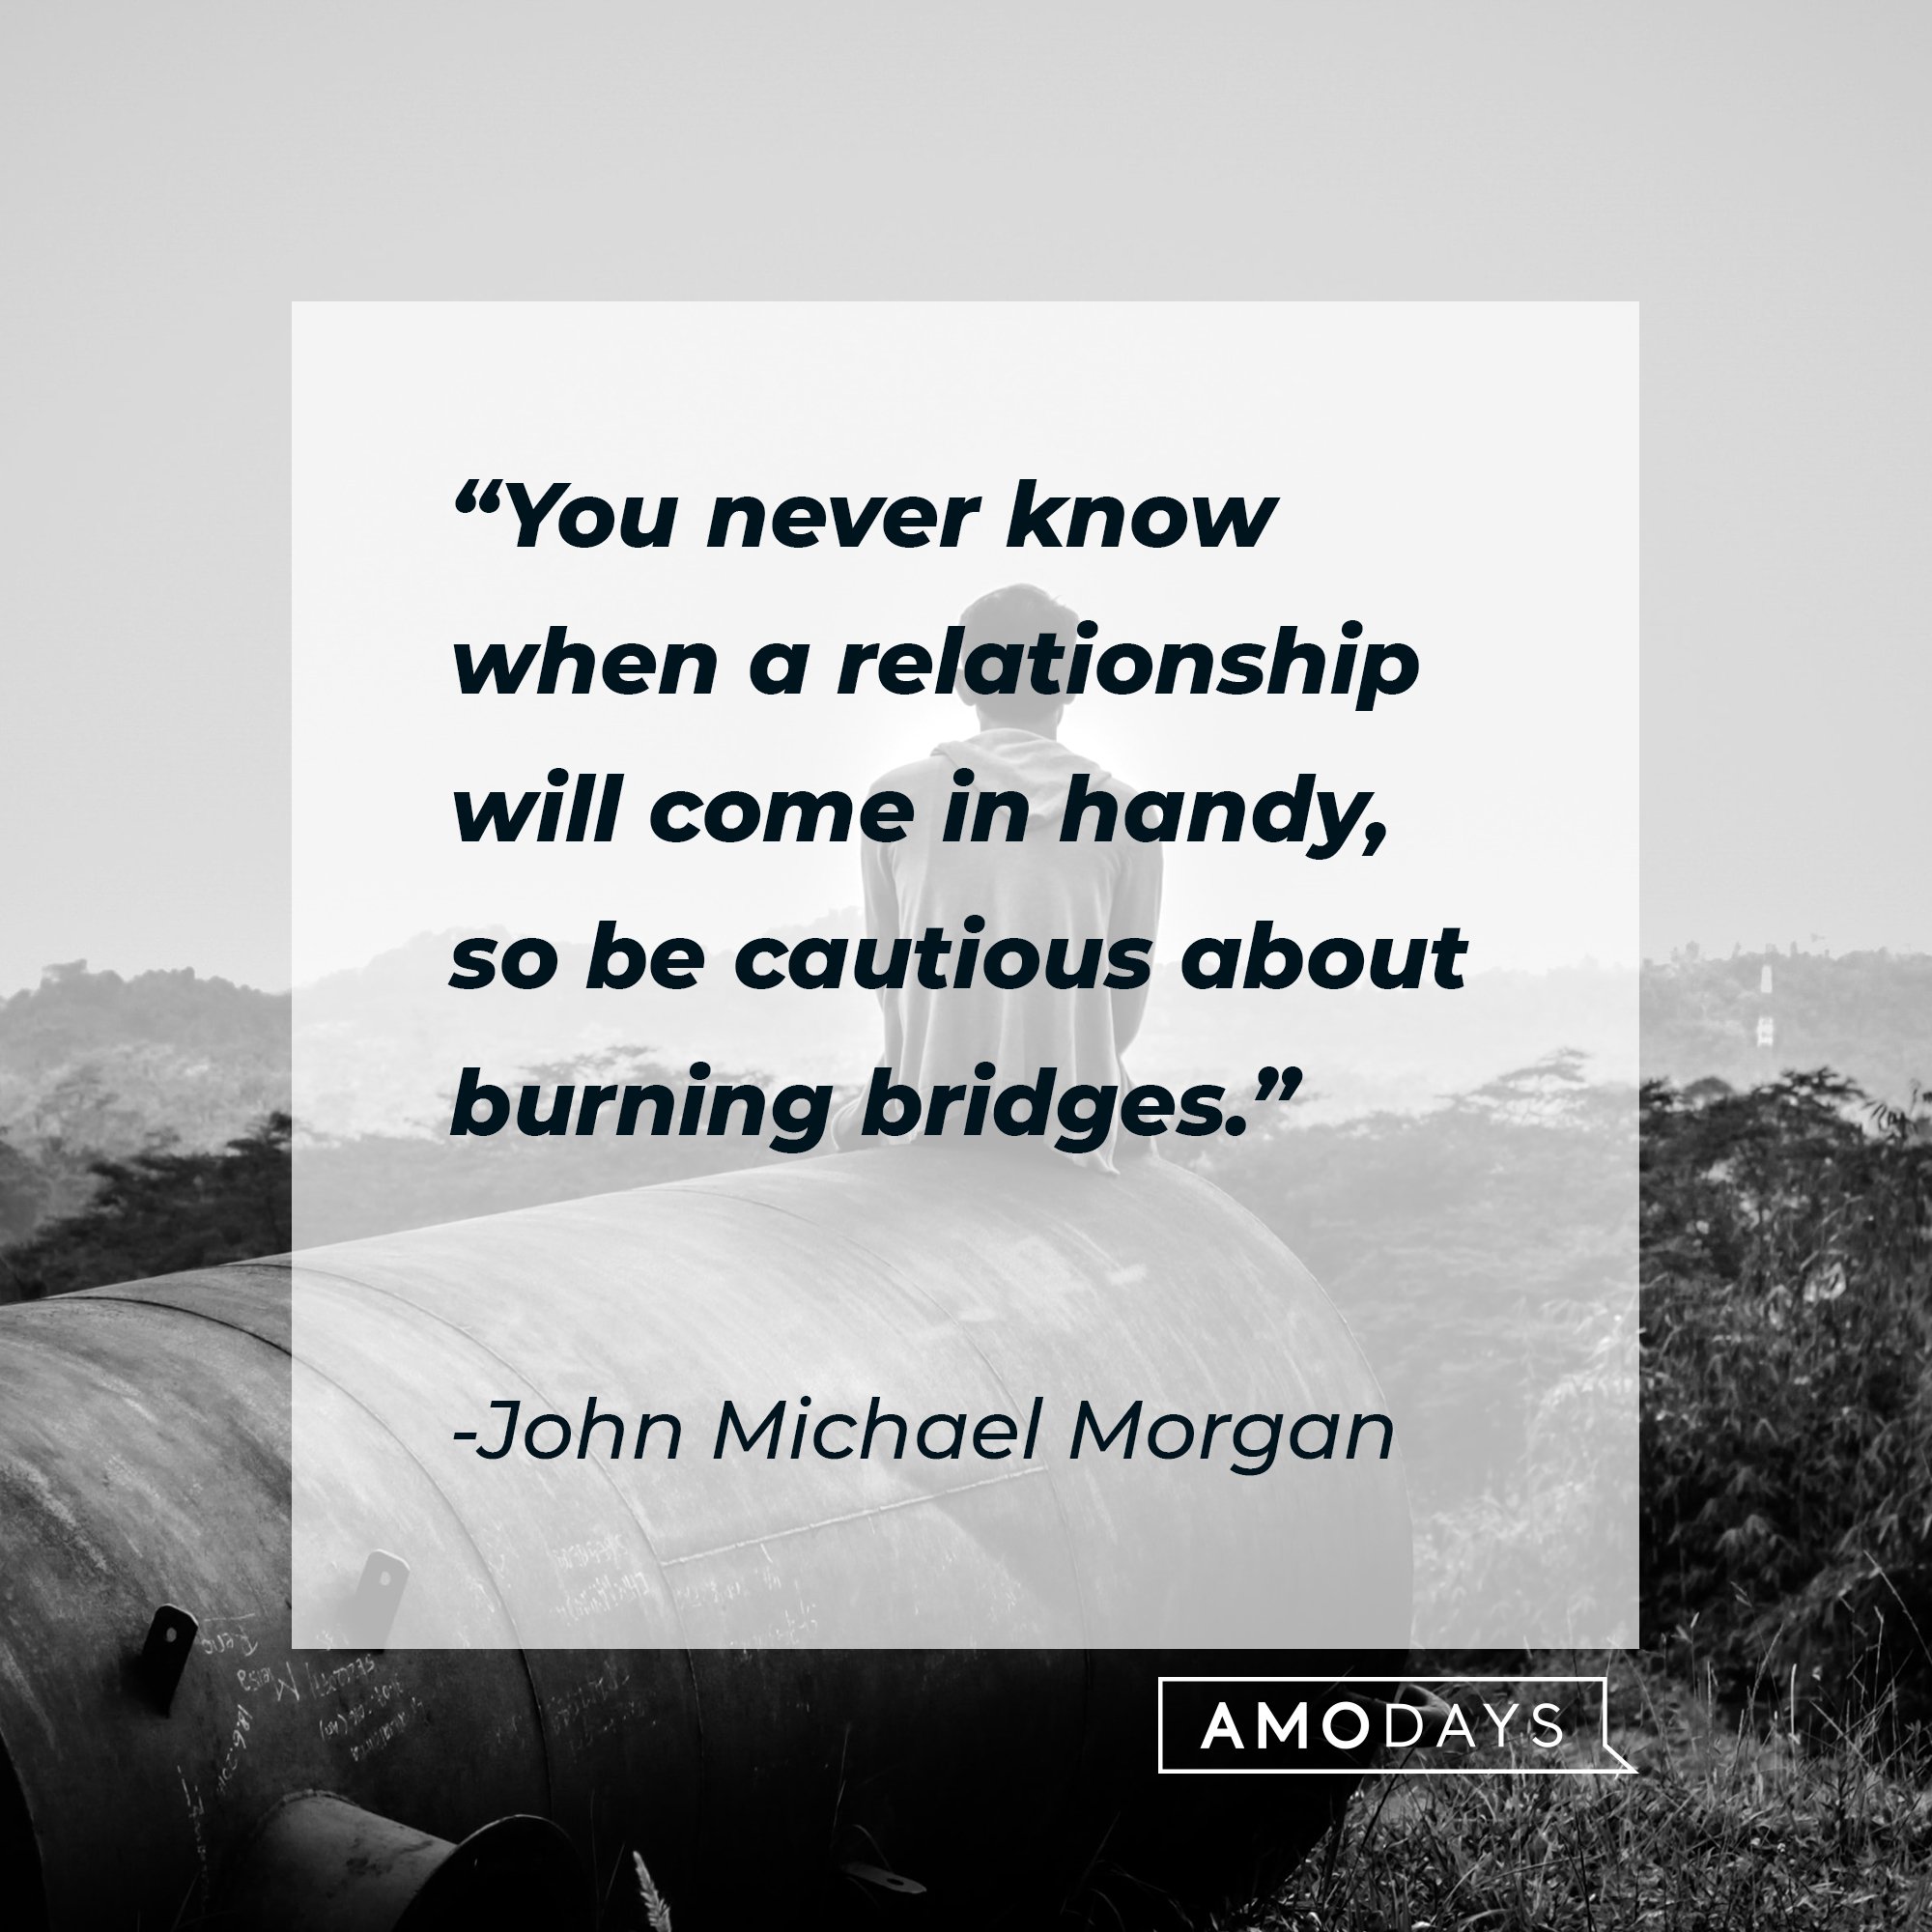 John Michael Morgan’s quote: "You never know when a relationship will come in handy, so be cautious about burning bridges." | Image: AmoDays